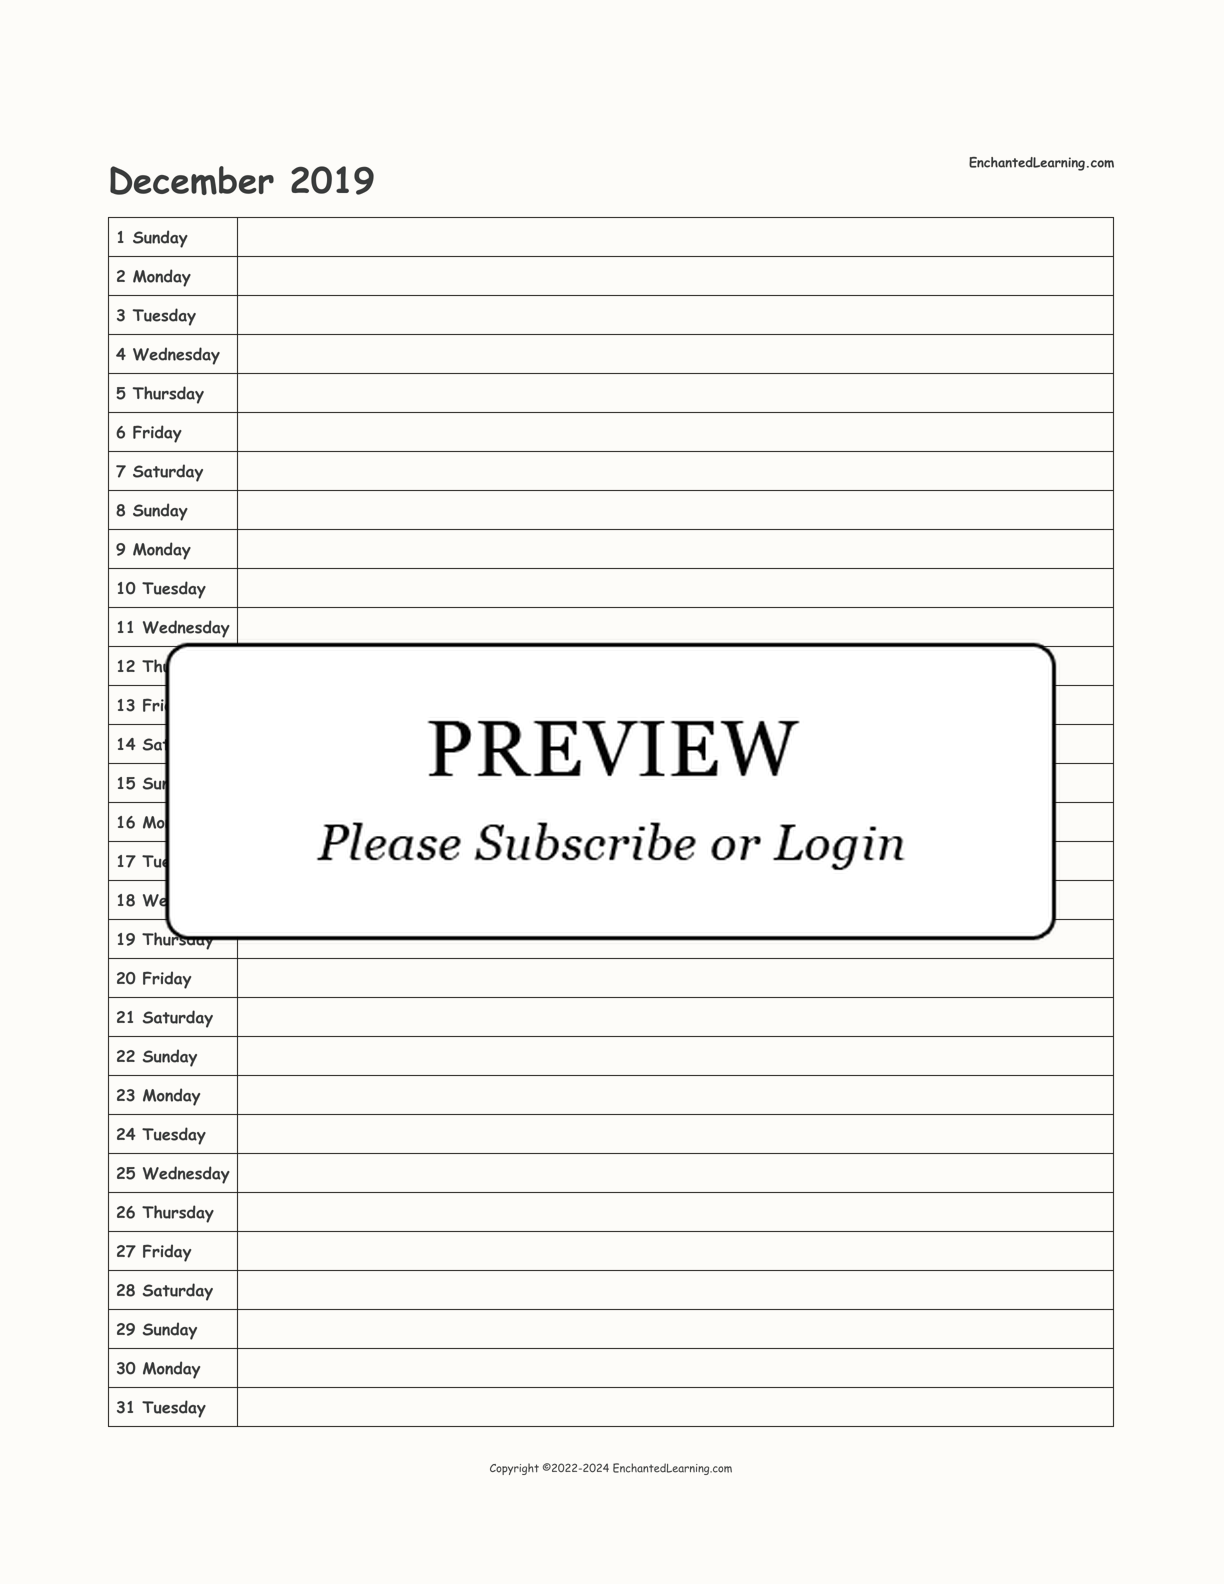 2019 Scheduling Calendar interactive printout page 12